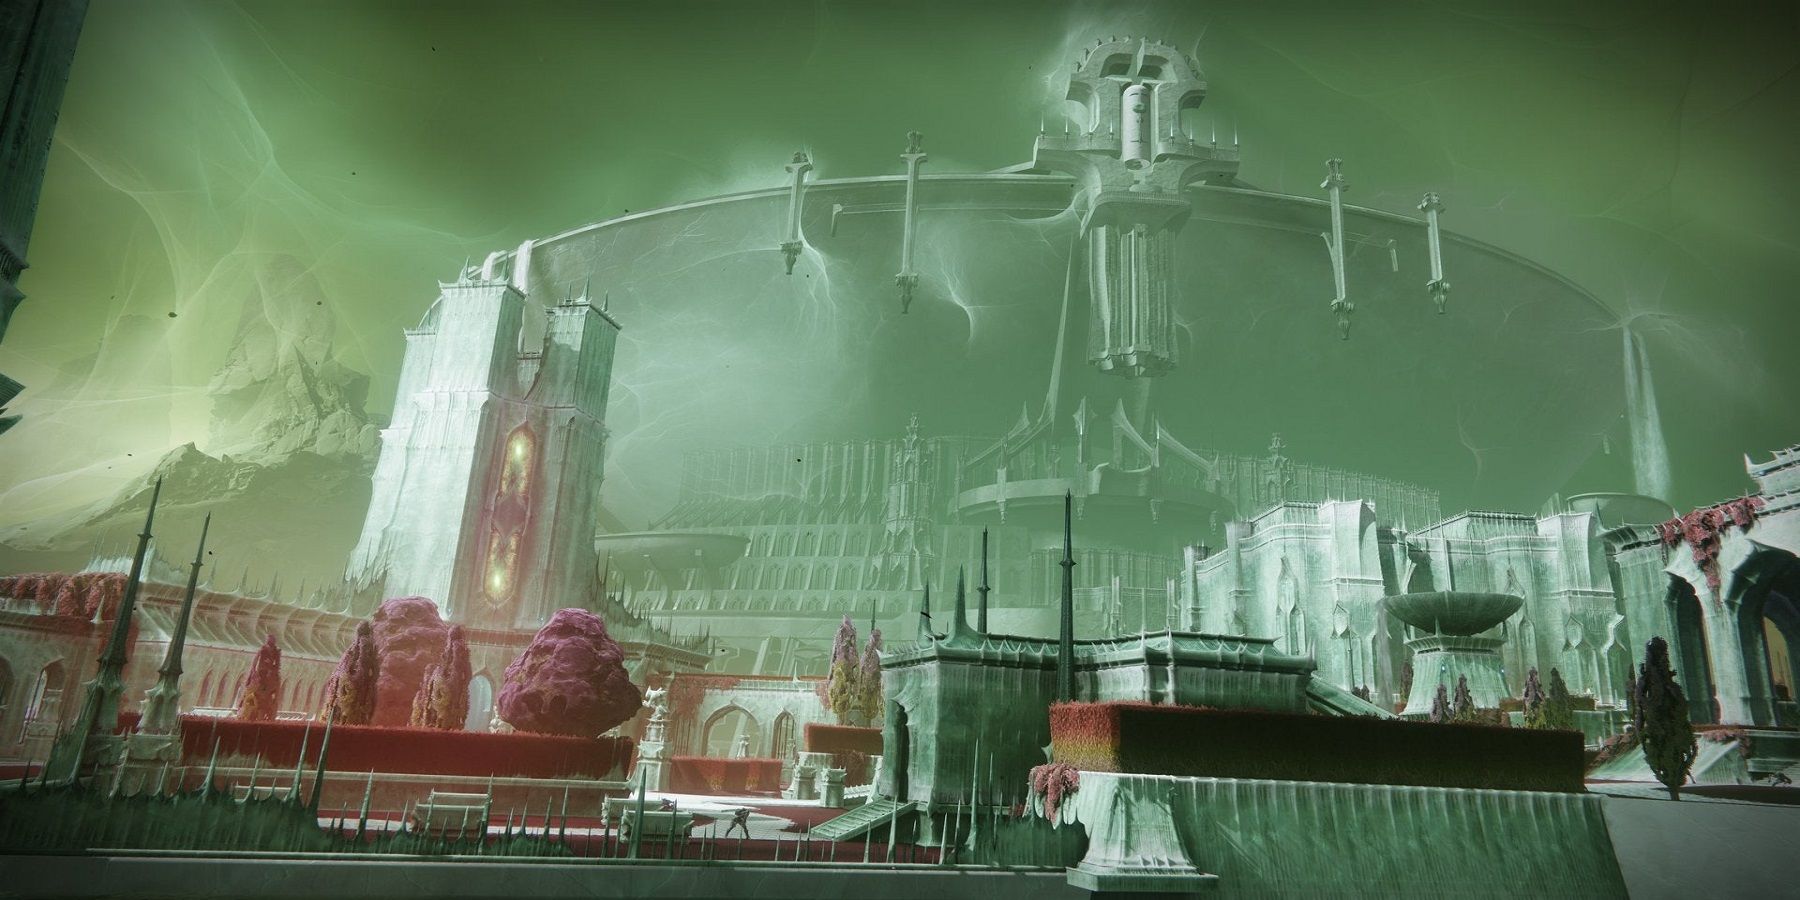 Destiny 2 players are using science to decipher teases in The Witch Queen's new trailer.